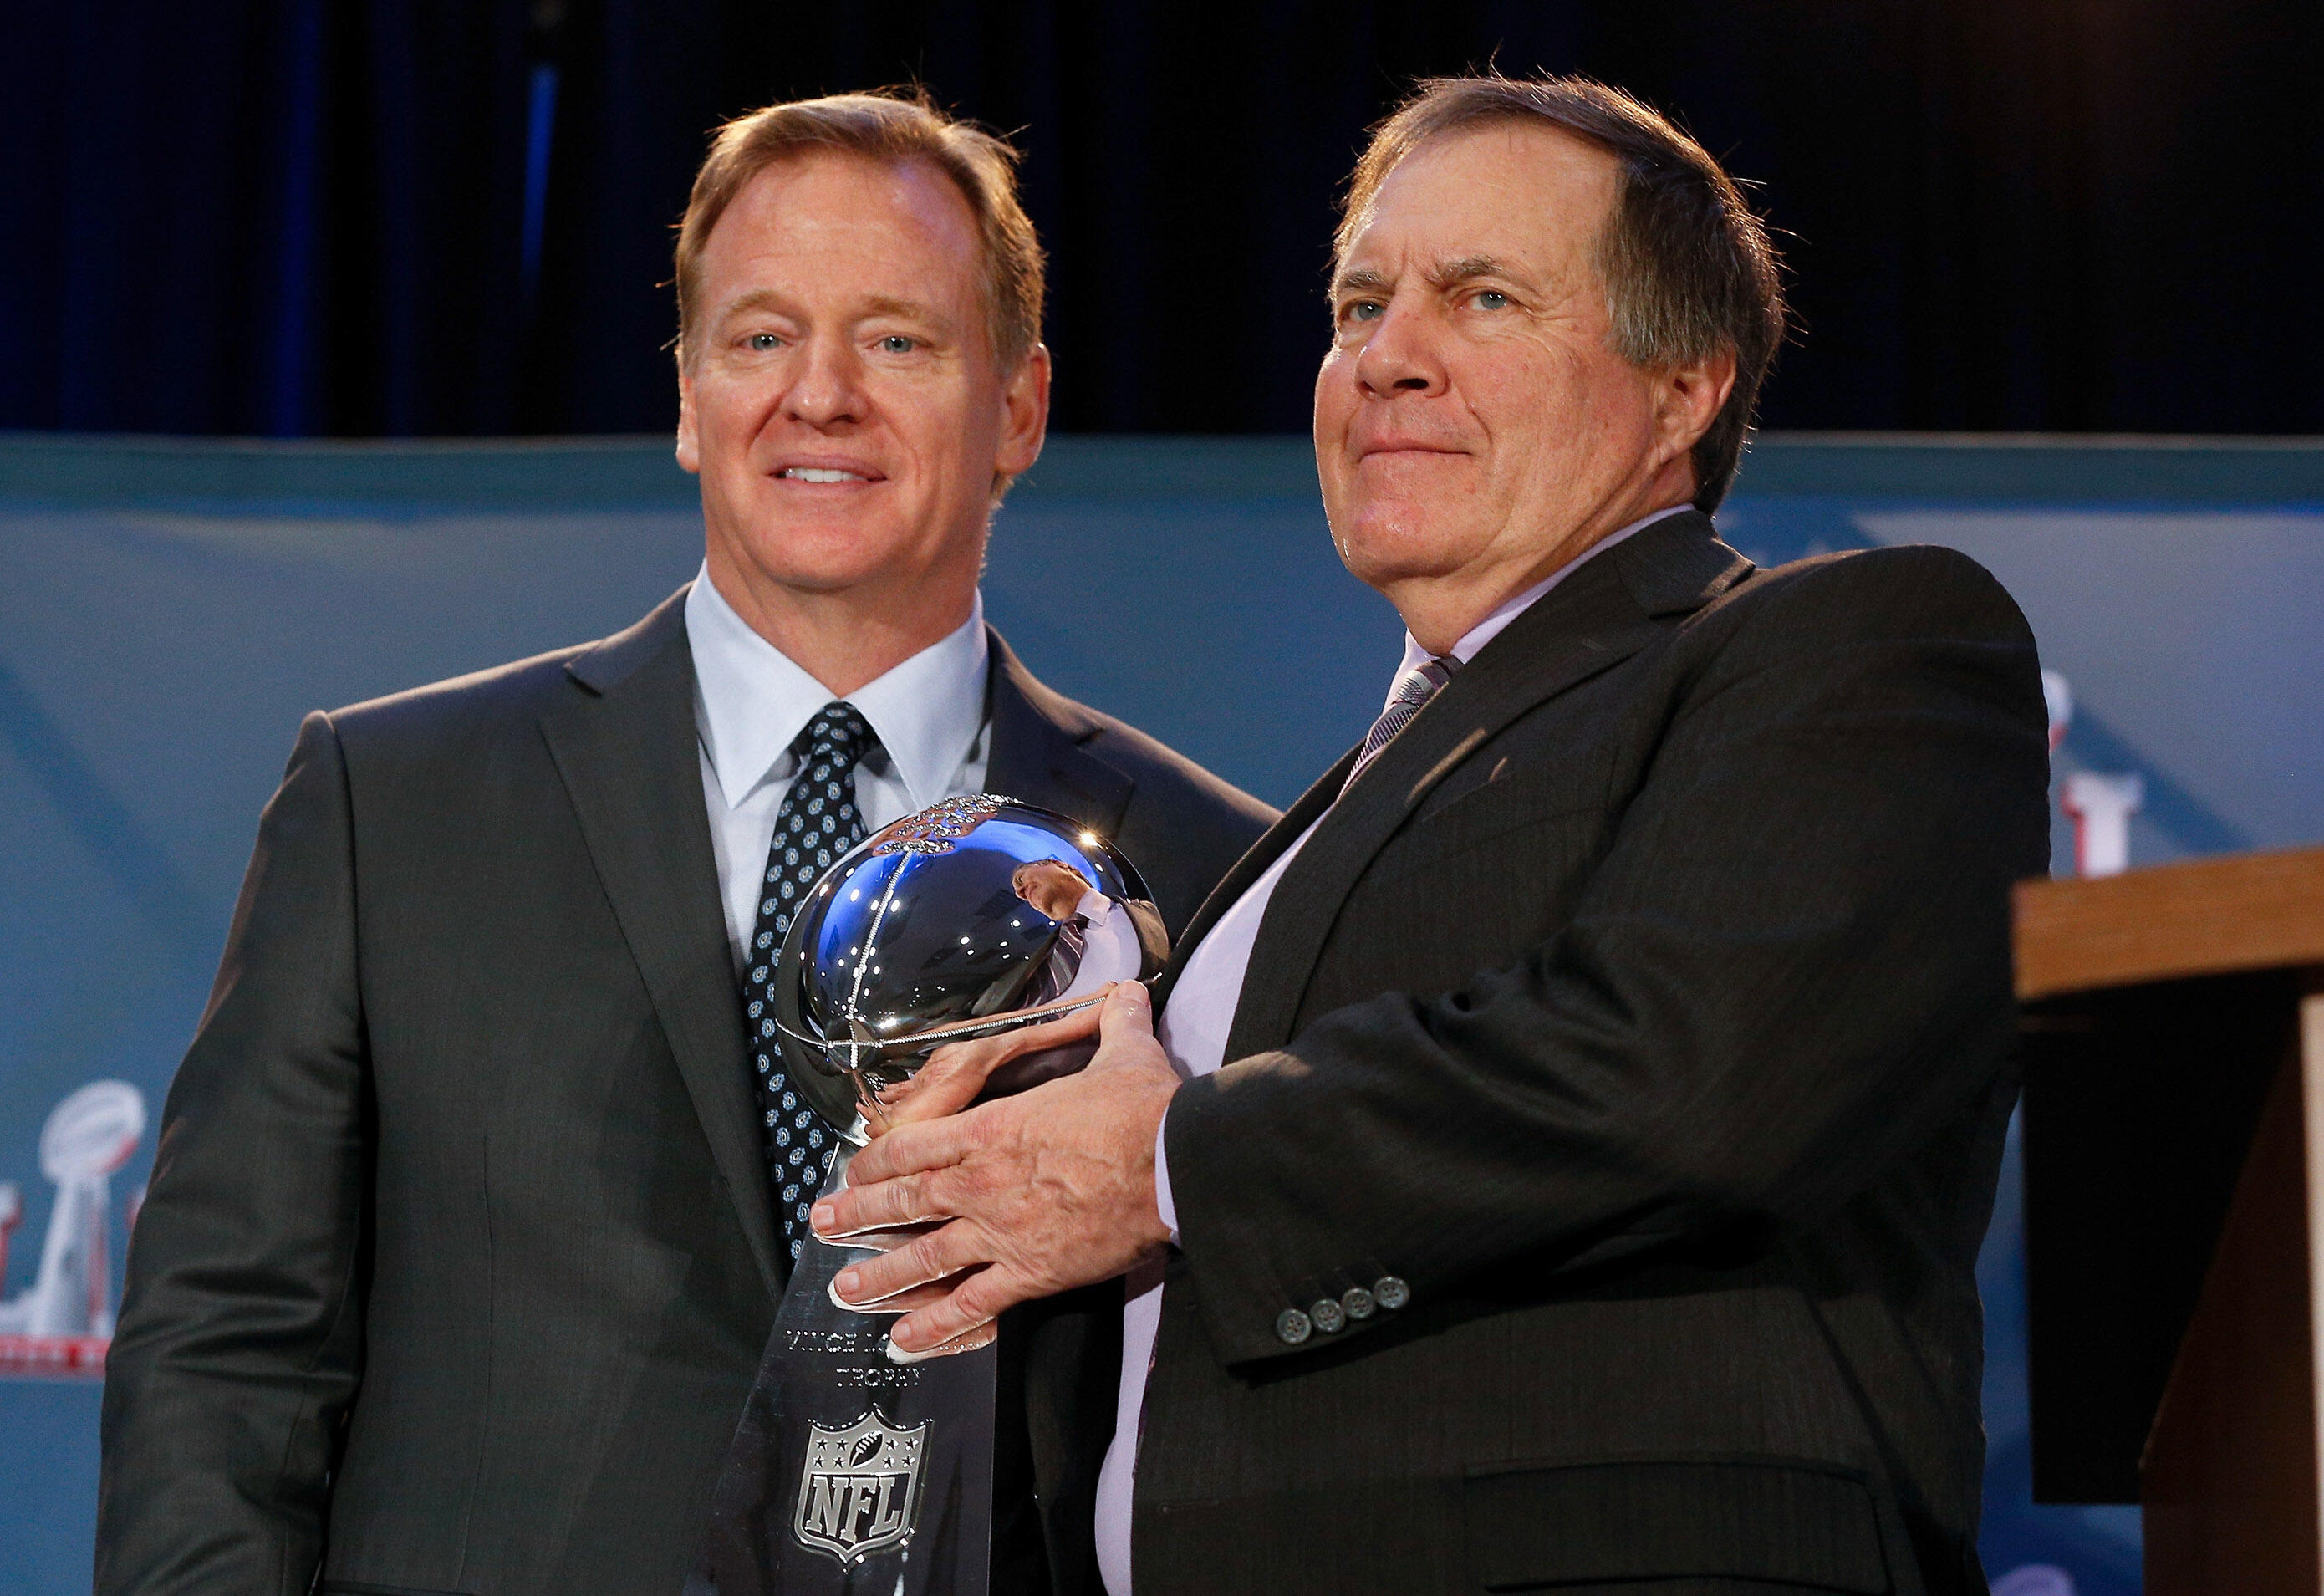 HOUSTON, TX - FEBRUARY 06:  NFL Commissioner Roger Goodell, left, and head coach Bill Belichick of the New England Patriots with the Vince Lombardi Championship Trophy at the Super Bowl Winner and MVP press conference on February 6, 2017 in Houston, Texas